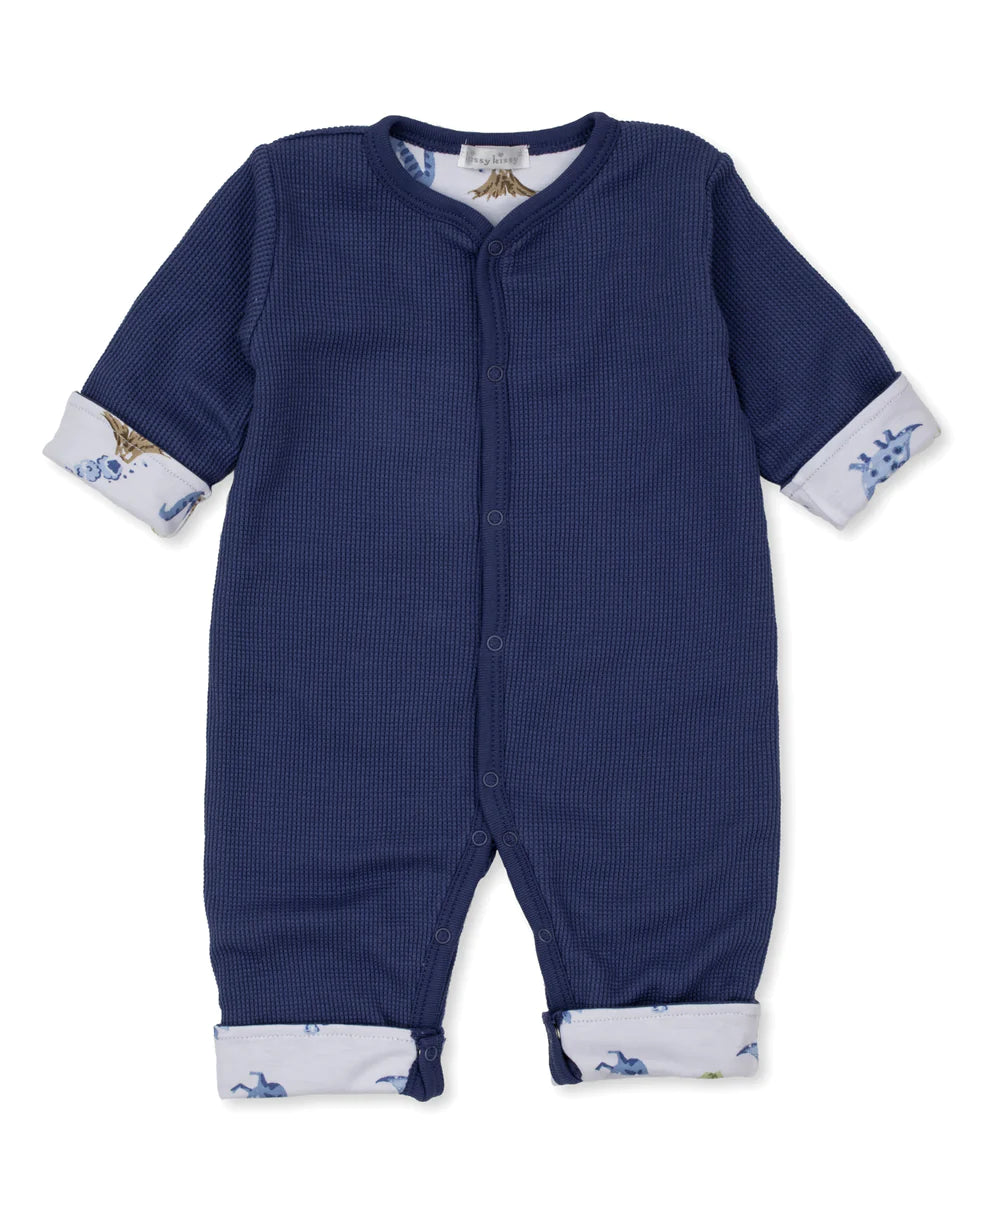 Kissy Kissy Dino Territory Playsuit 6-9 Months